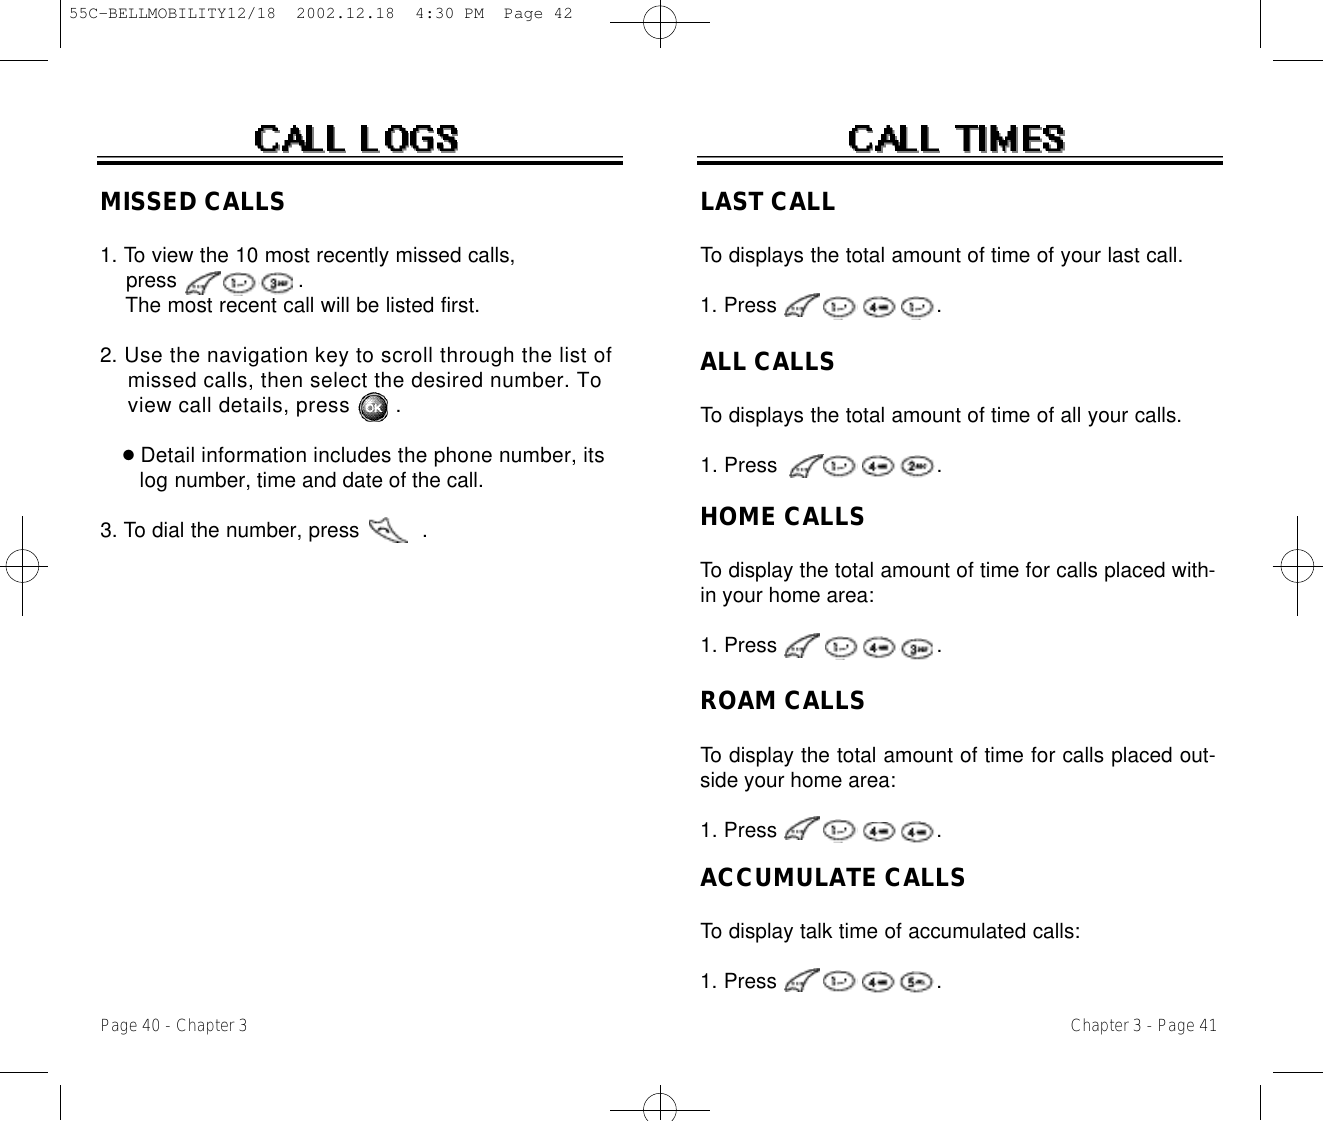 Chapter 3 - Page 41Page 40 - Chapter 3MISSED CALLS1. To view the 10 most recently missed calls, press                   .  The most recent call will be listed first. 2. Use the navigation key to scroll through the list of missed calls, then select the desired number. To view call details, press .●Detail information includes the phone number, its l o g number, time and date of the call.3. To dial the number, press          .LAST CALLTo displays the total amount of time of your last call.1. Press                         .ALL CALLSTo displays the total amount of time of all your calls.1. Press                         .HOME CALLSTo display the total amount of time for calls placed with-in your home area:1. Press                         .ROAM CALLSTo display the total amount of time for calls placed out-side your home area:1. Press                         .ACCUMULATE CALLSTo display talk time of accumulated calls:1. Press                         .55C-BELLMOBILITY12/18  2002.12.18  4:30 PM  Page 42